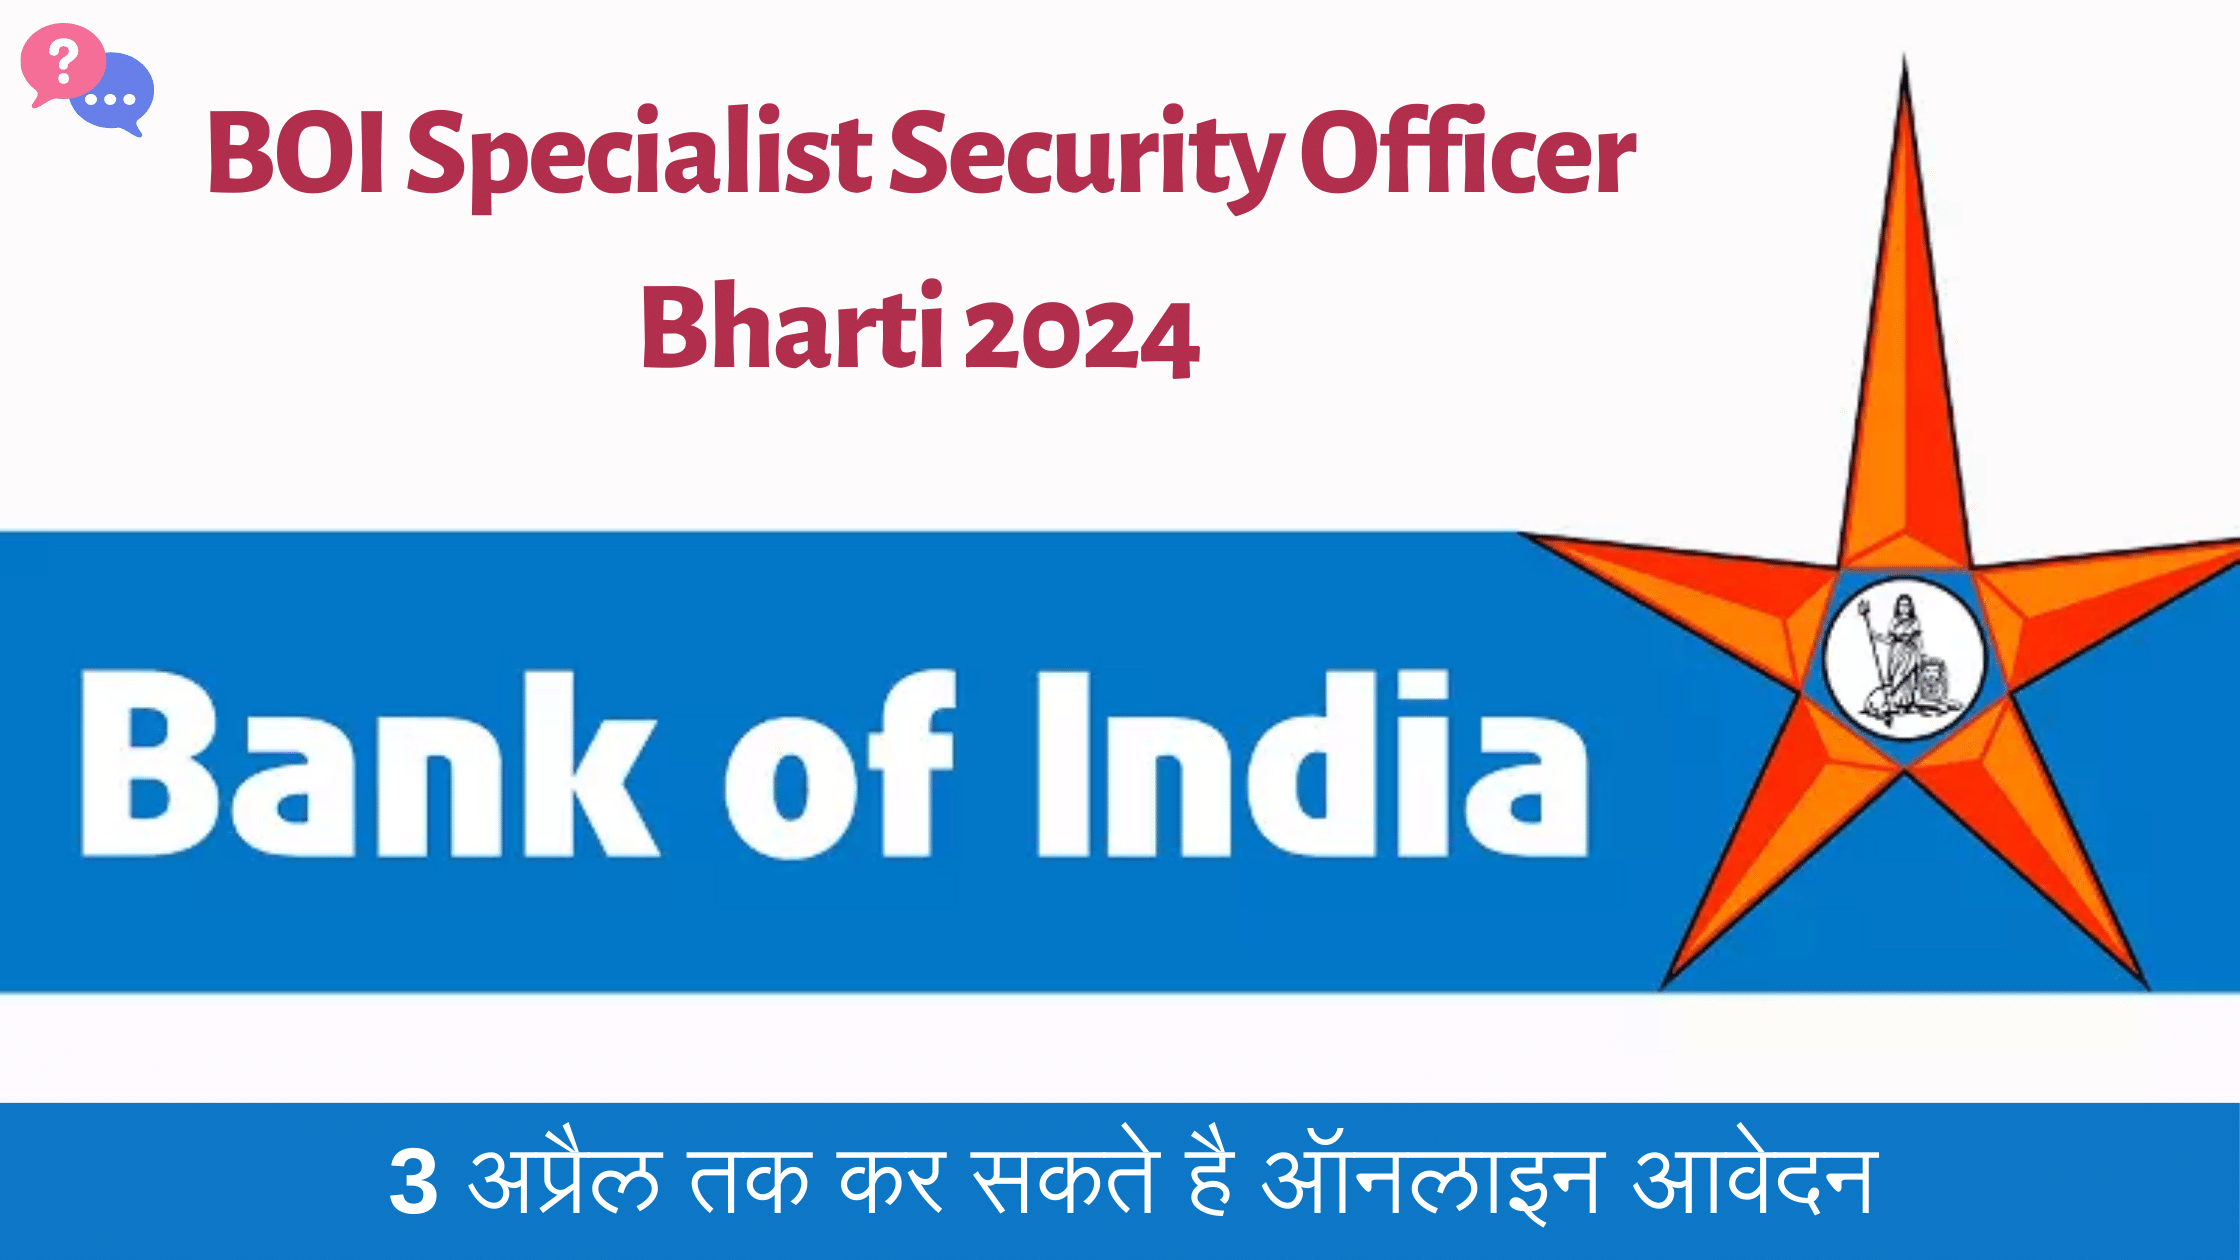 BOI Specialist Security Officer Bharti 2024